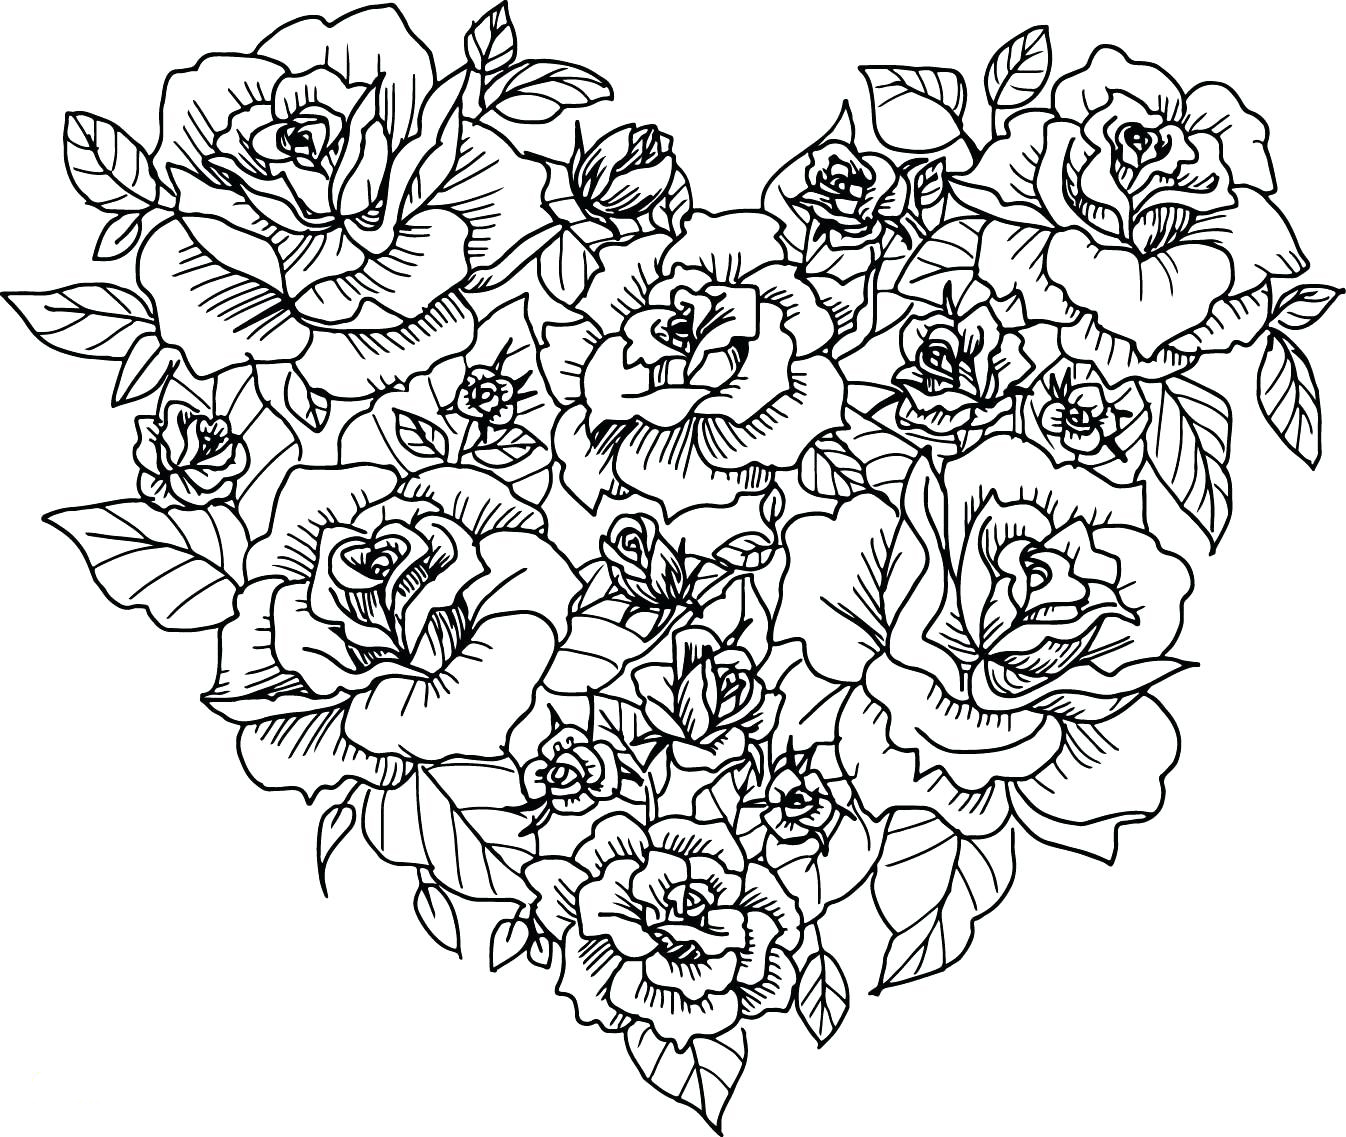 Swiss-sharepoint: Flower Heart Coloring Pages